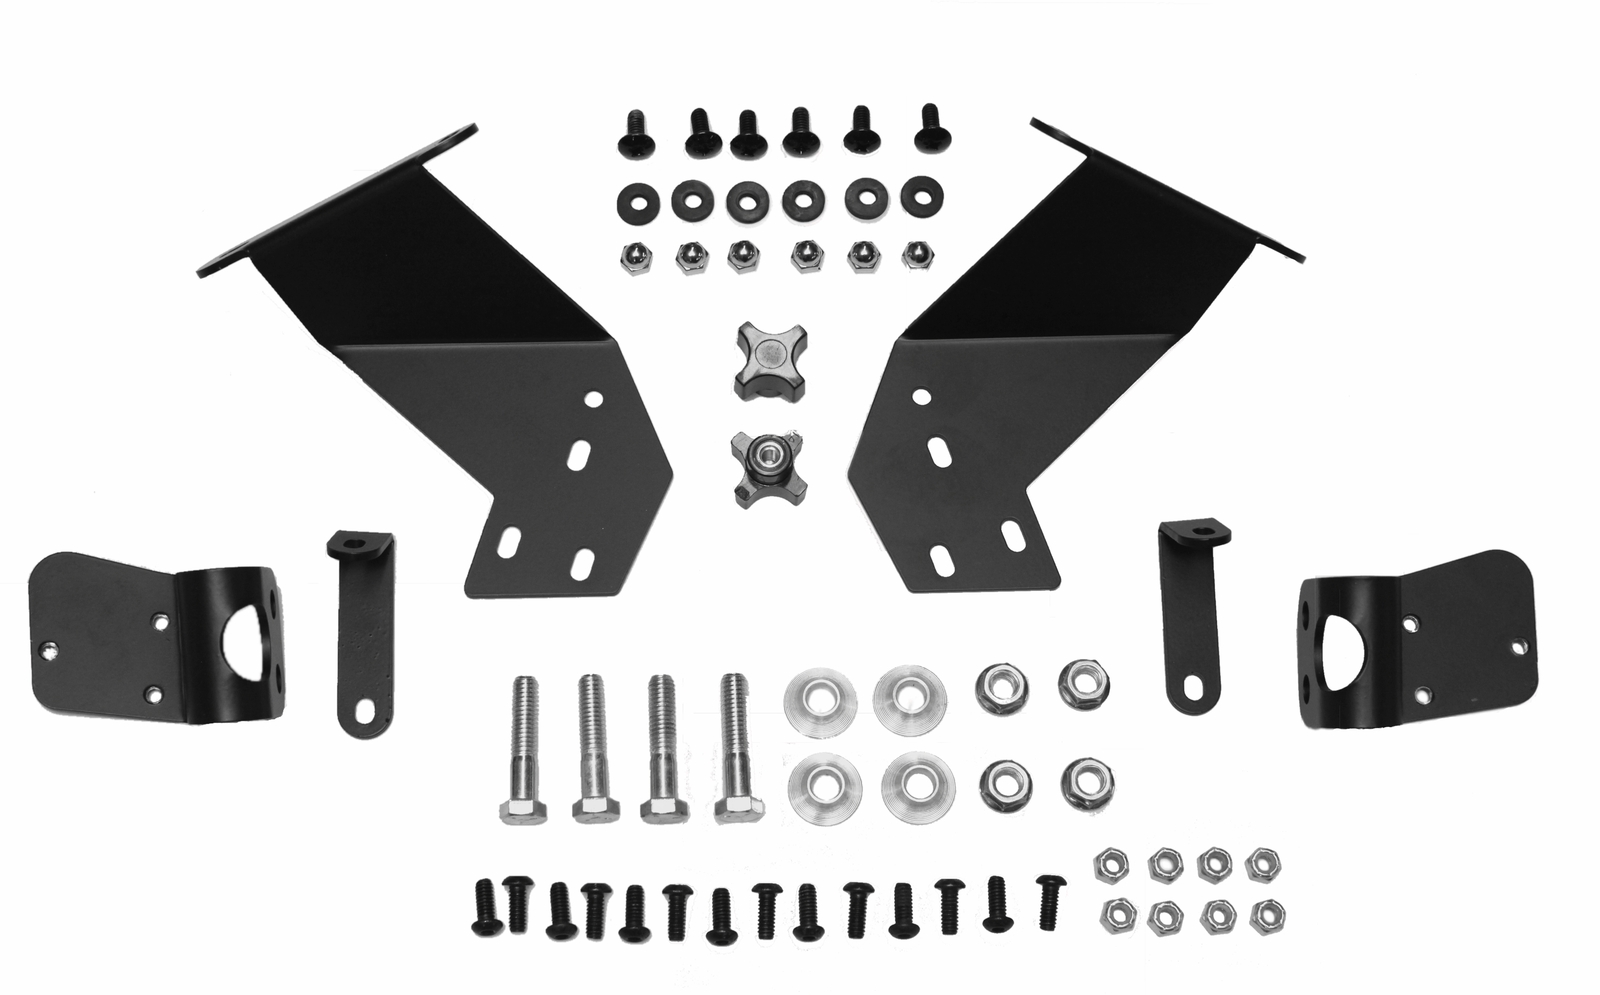 [KIT-PS15-18] KIT-PS15-18 ATTACHMENT KIT FOR PS-15 MODEL